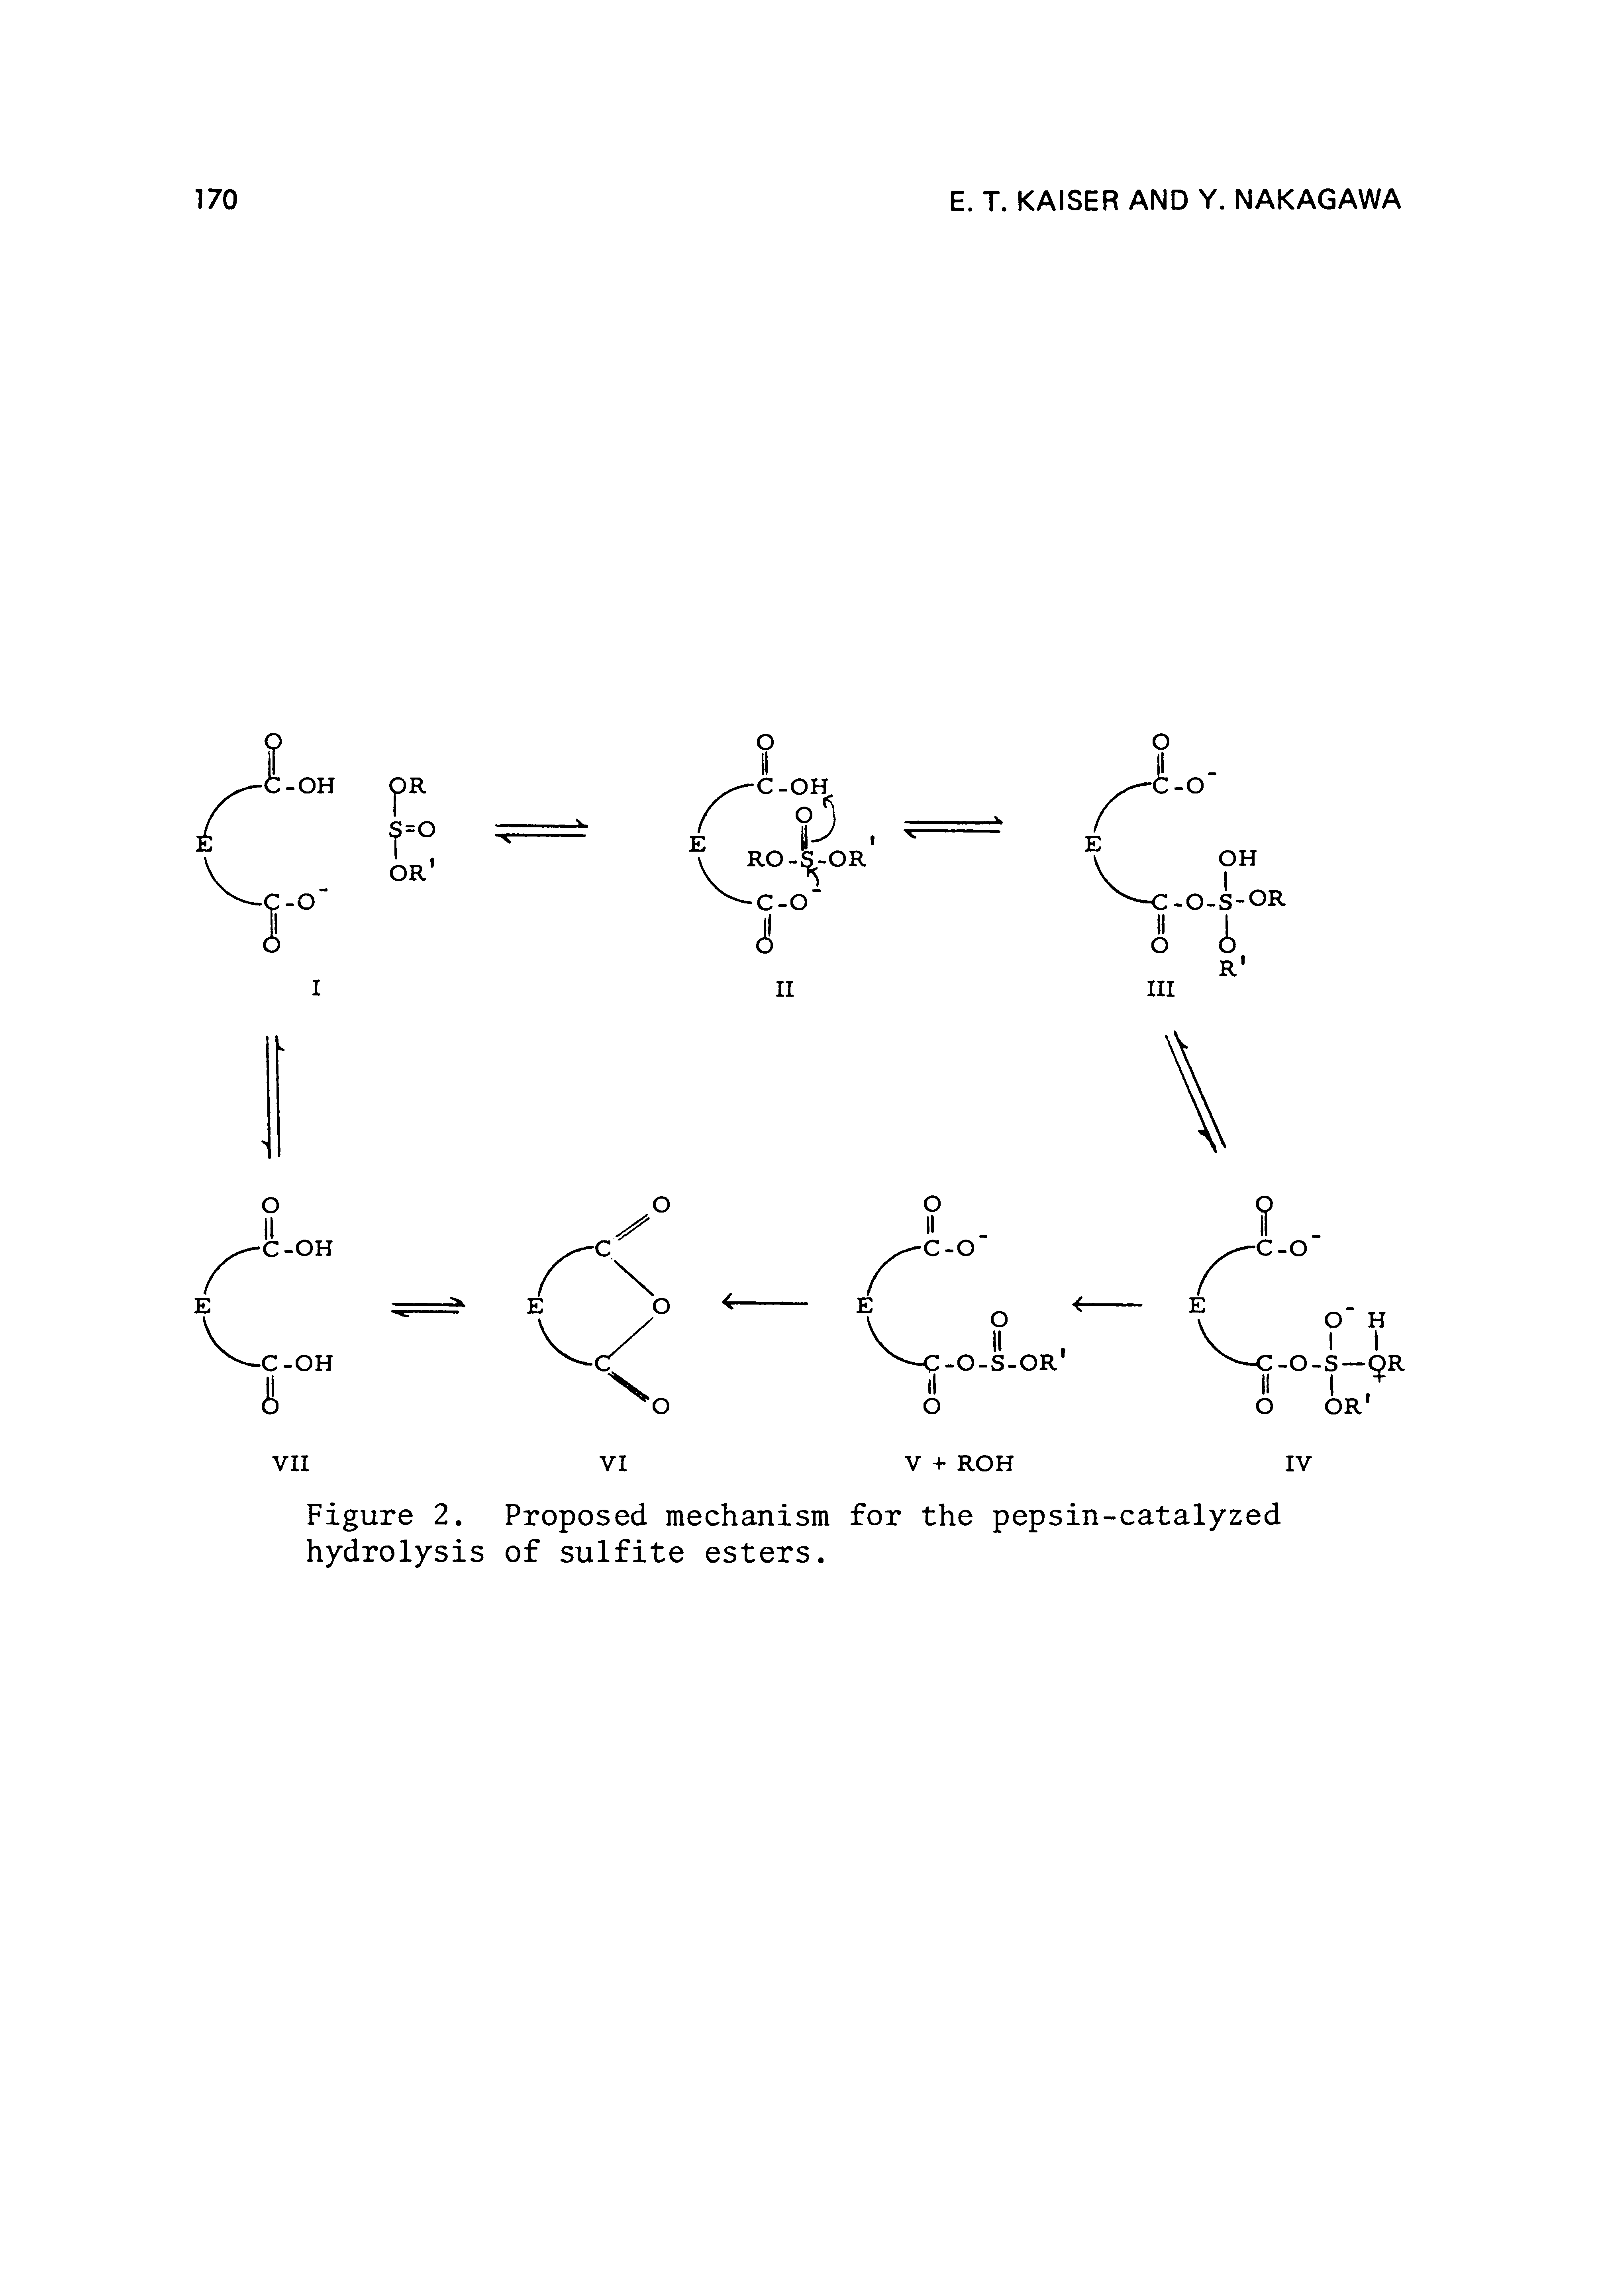 Figure 2. Proposed mechanism for the pepsin-catalyzed hydrolysis of sulfite esters.